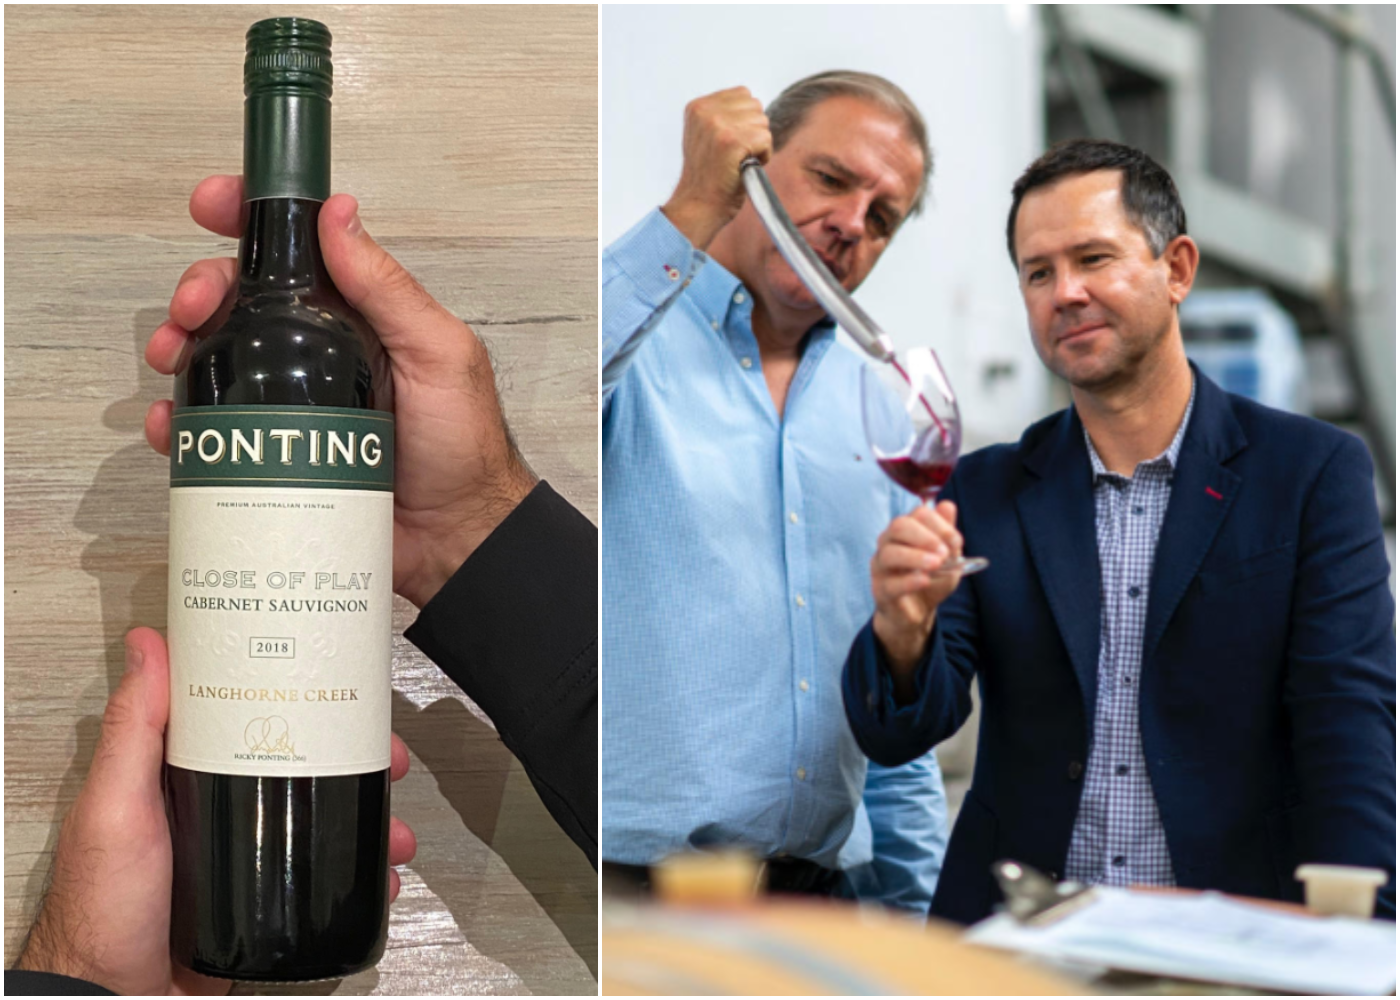 Ricky Ponting launched an eponymous label of his wine business